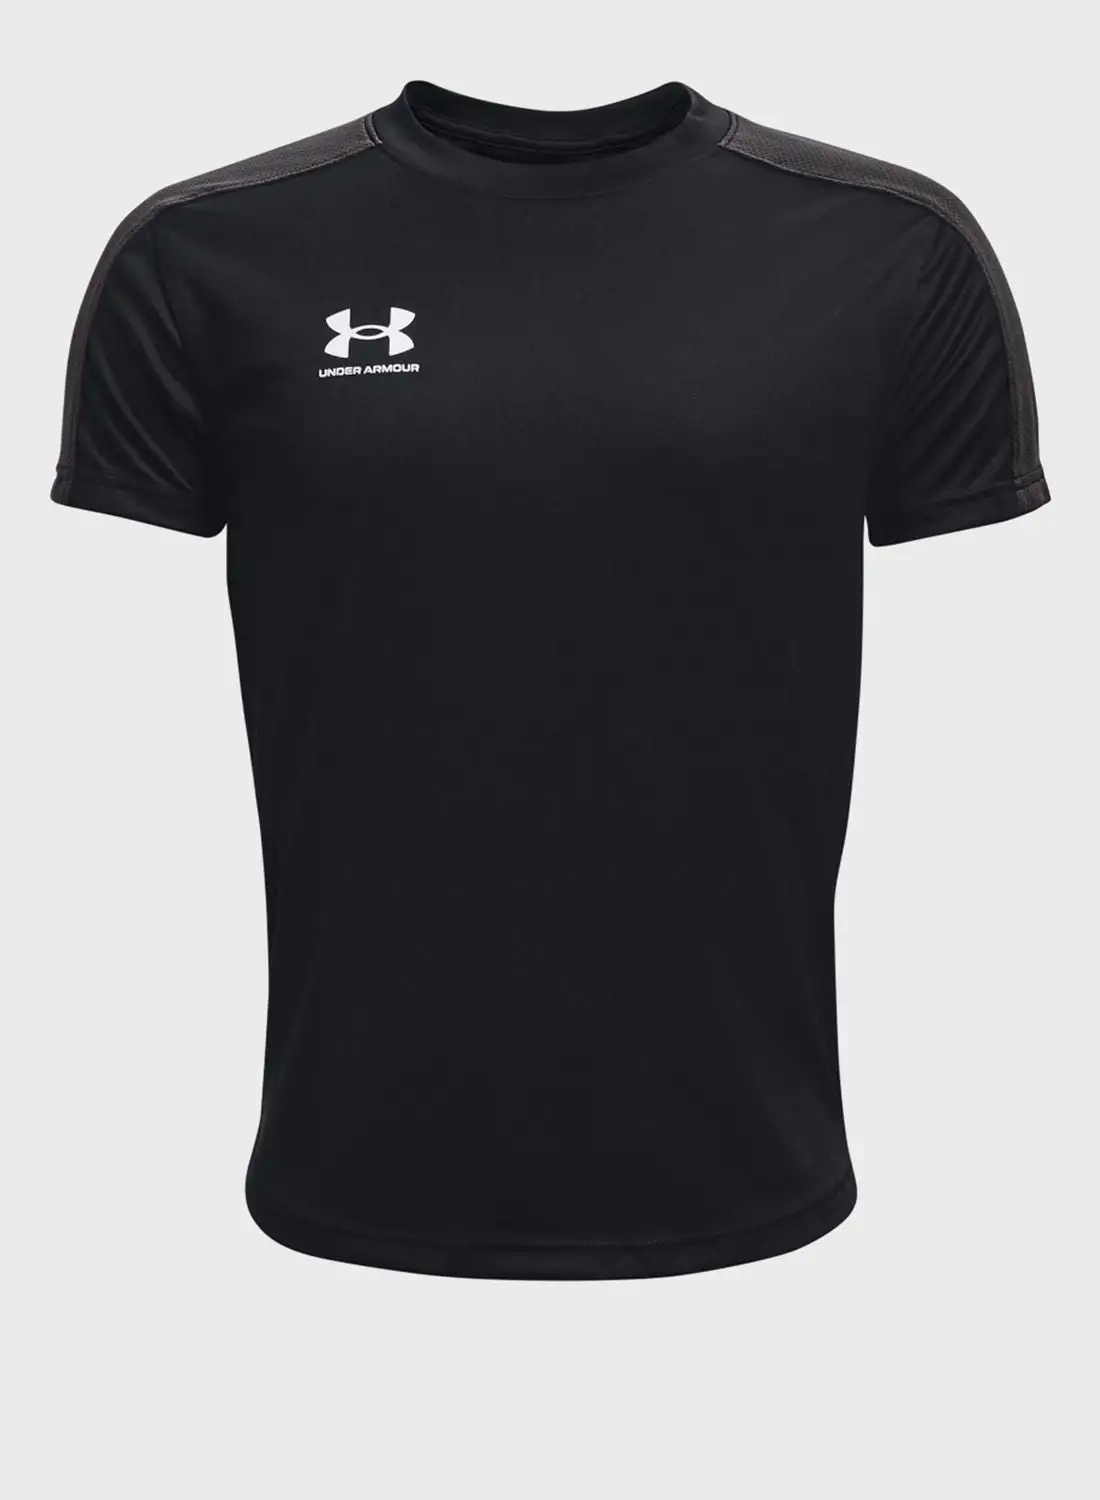 UNDER ARMOUR Youth Challenger T-Shirt